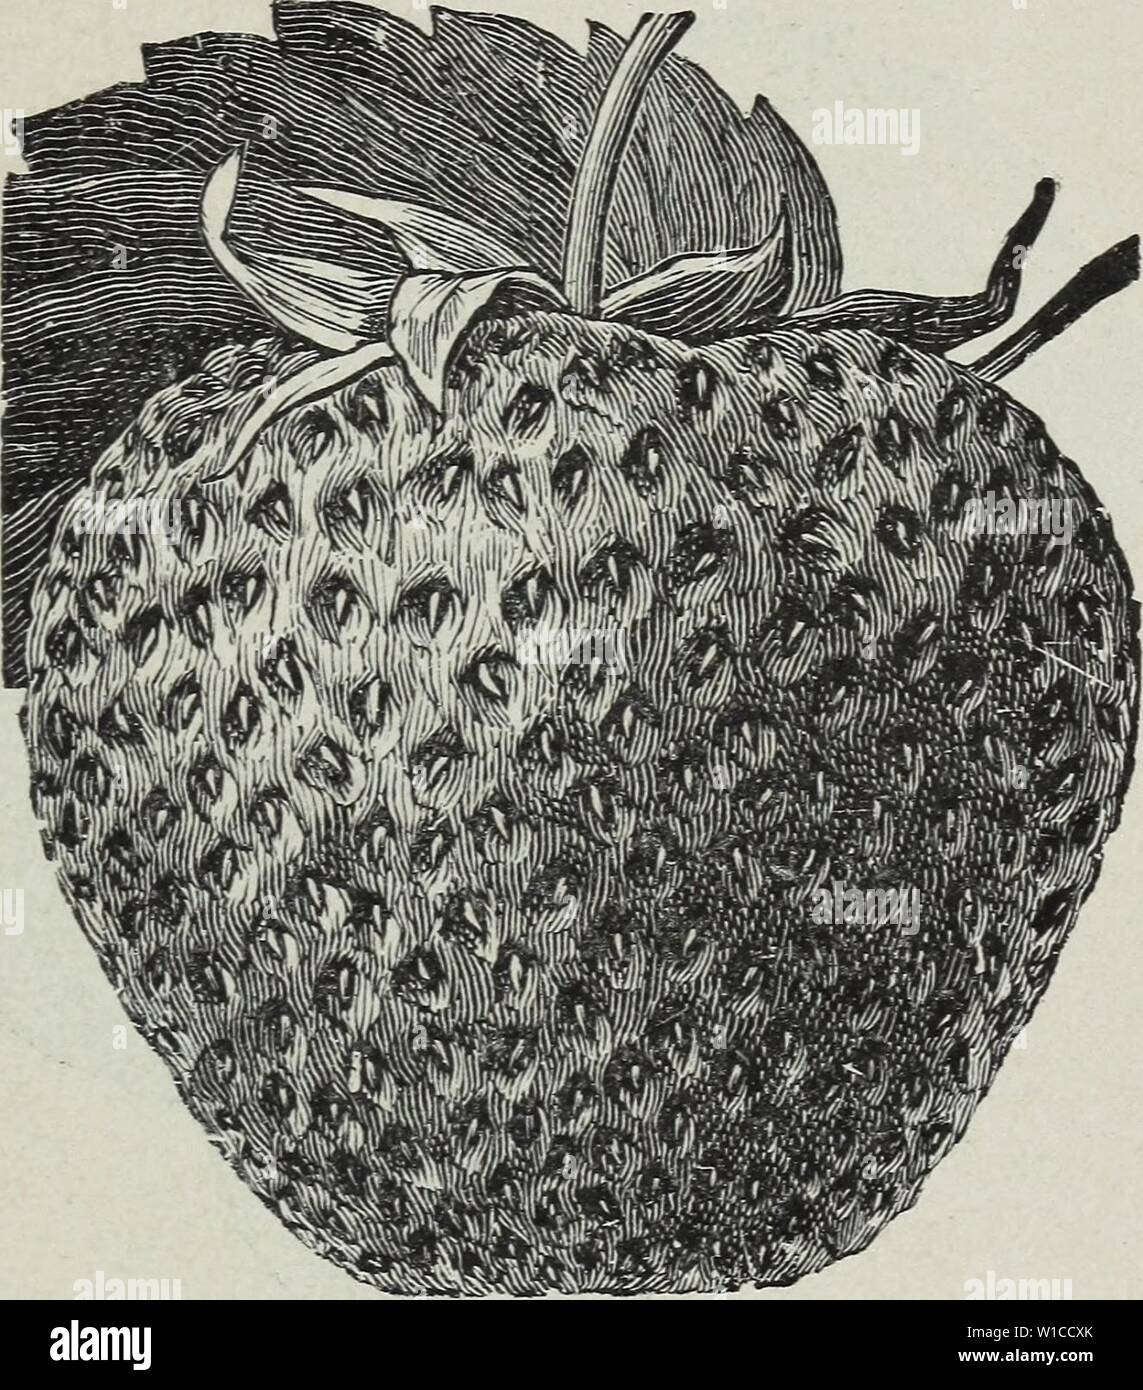 Archive image from page 6 of Descriptive strawberry plant catalogue of. Descriptive strawberry plant catalogue of 5,000,000 Perdue's best quality strawberry plants : grown at Perdue's strawberry plant farm . descriptivestraw1925perd Year: 1925  Showell, Maryland    BIG JOE (Joe Johnson.) (Mid-season to late). A vigorous grower of very large plants that are very productive of large size handsome looking berries with a large bright green cap. A real fancy berry that brings fancy prices. Note the following testimonial. Shenandoah Co., Va., April 1, 1924. Dear Sir:— I am sending you an order for s Stock Photo